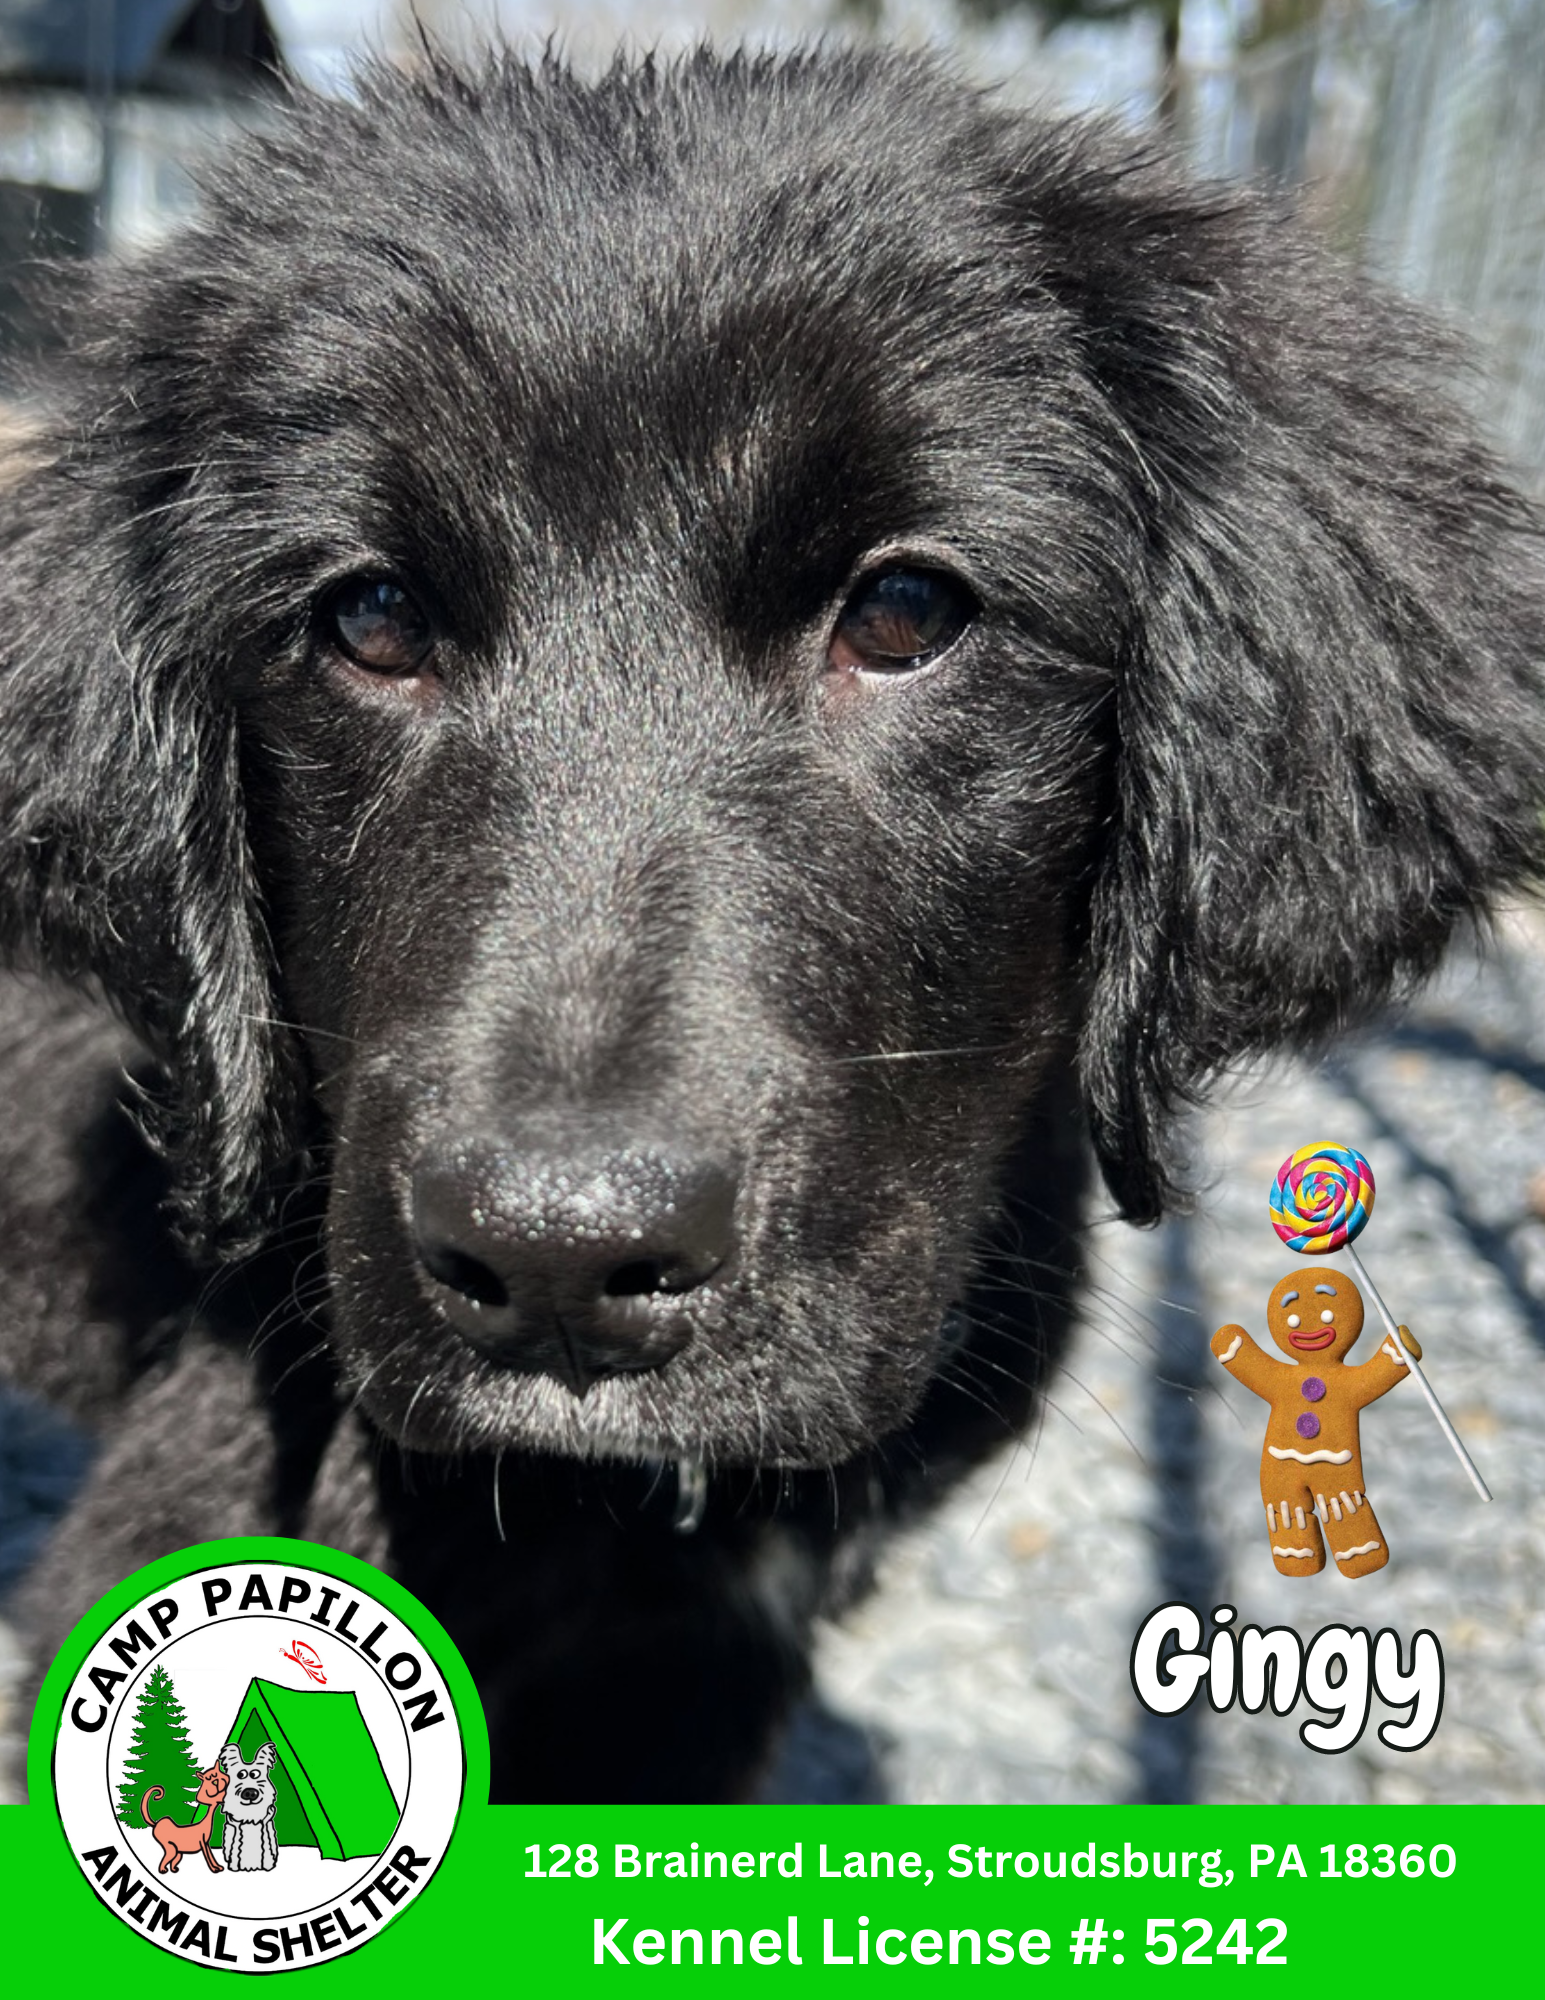 adoptable Dog in Stroudsburg, PA named Gingy